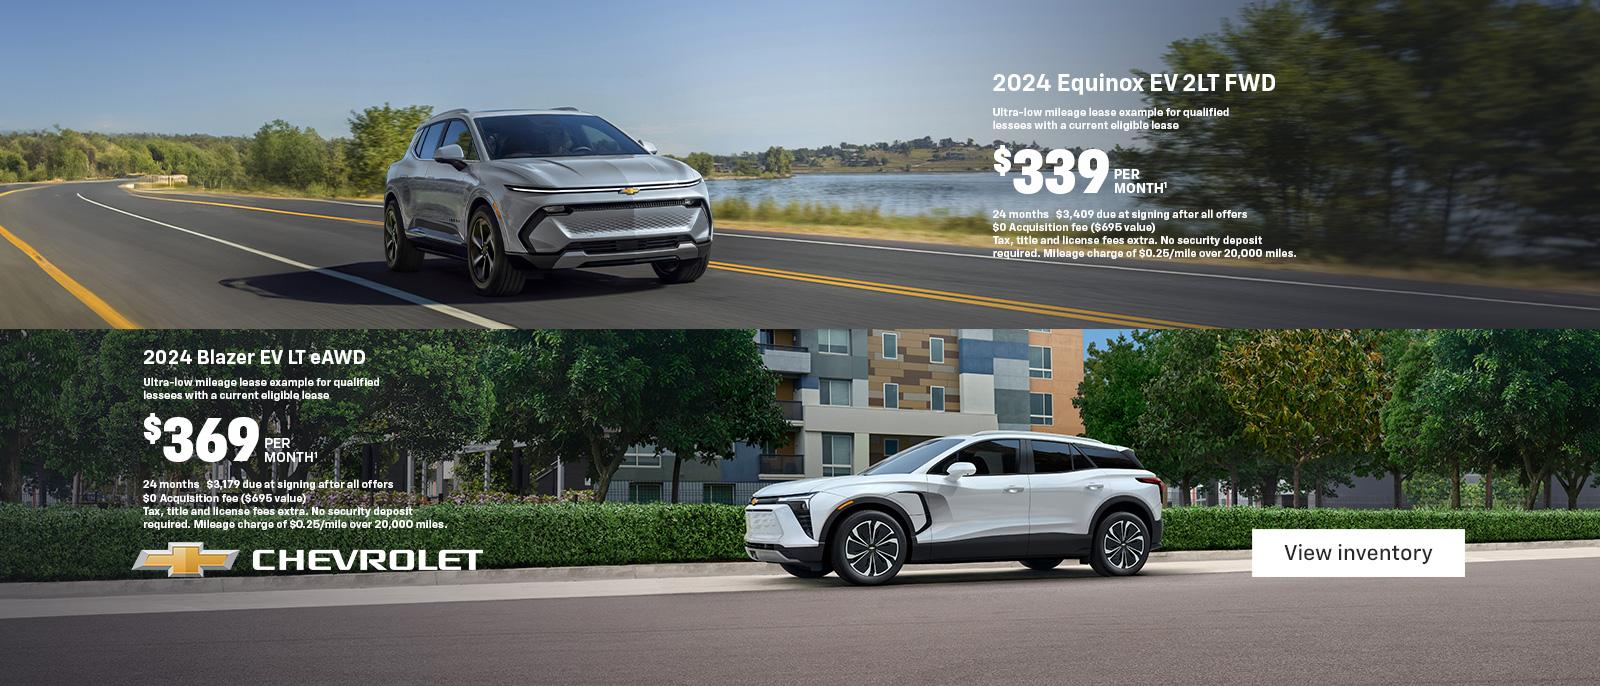 2024 Equinox EV 2LT FWD. Ultra-low mileage lease example for qualified lessees with a current eligible lease. $339 per month. 24 months. $3,409 due at signing after all offers. $0 Acquisition fee ($695 value). Tax, title and license fees extra. No security deposit required. Mileage charge of $0.25/mile over 20,000 miles. 2024 Blazer EV LT eAWD. Ultra-low mileage lease example for qualified lessees with a current eligible lease. $369 per month. 24 months. $3,179 due at signing after all offers. $0 Acquisition fee ($695 value). Tax, title and license fees extra. No security deposit required. Mileage charge of $0.25/mile over 20,000 miles.